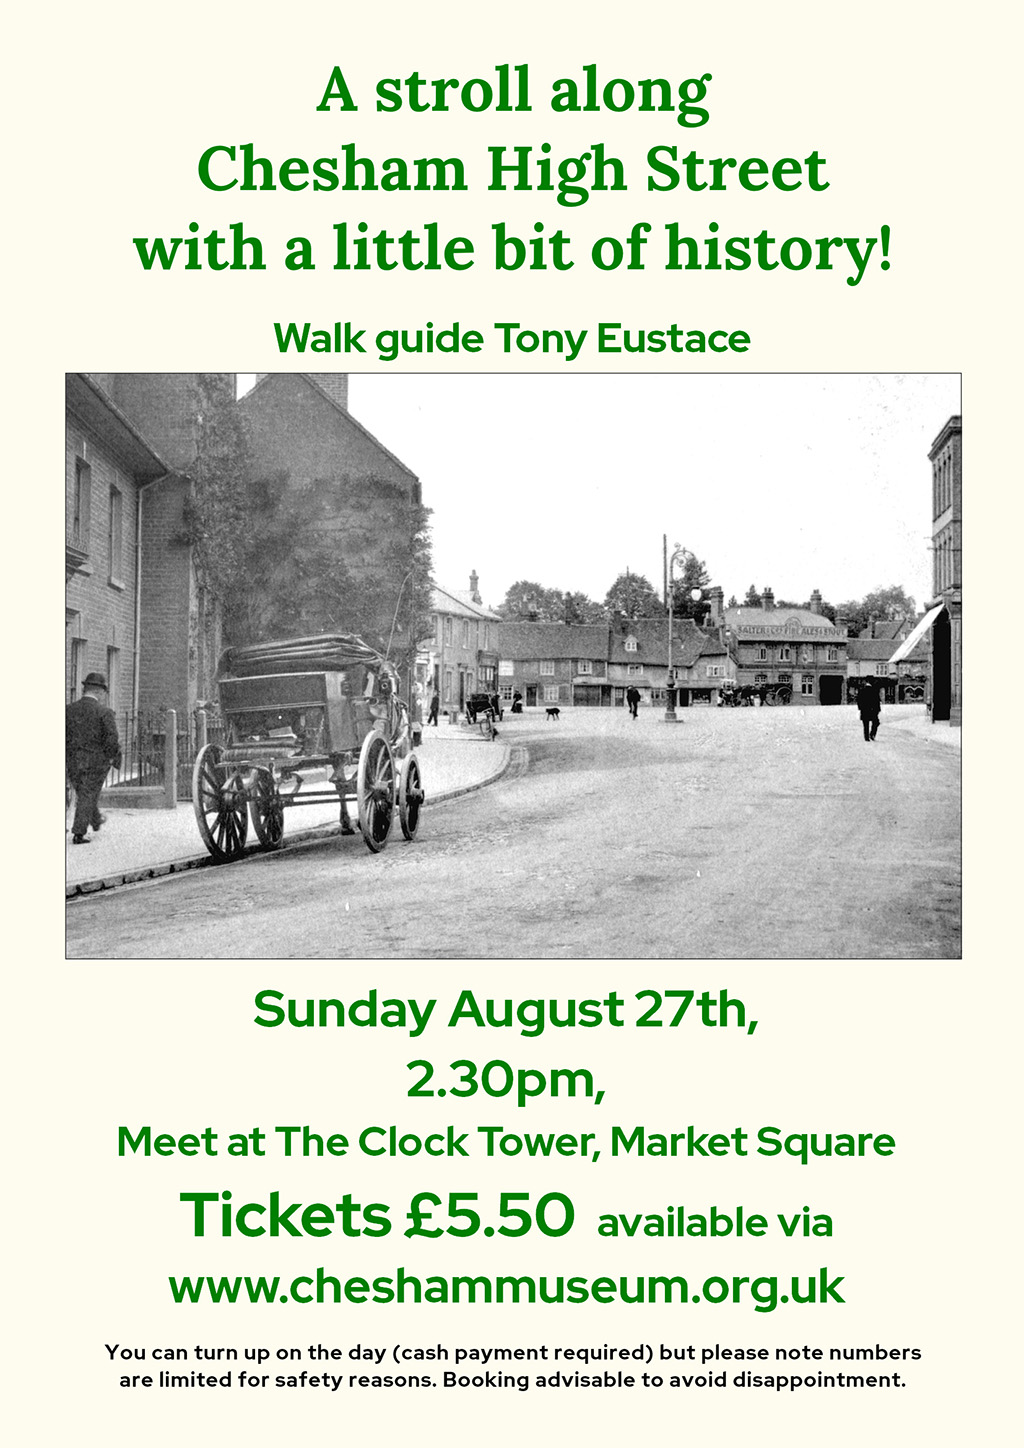 Poster showing the event A stroll around Chesham High Street with a little bit of history. There is an image of Chesham buildings and information on the event date 27 August 2.30pm meet at Clock Tower tickets £5.50